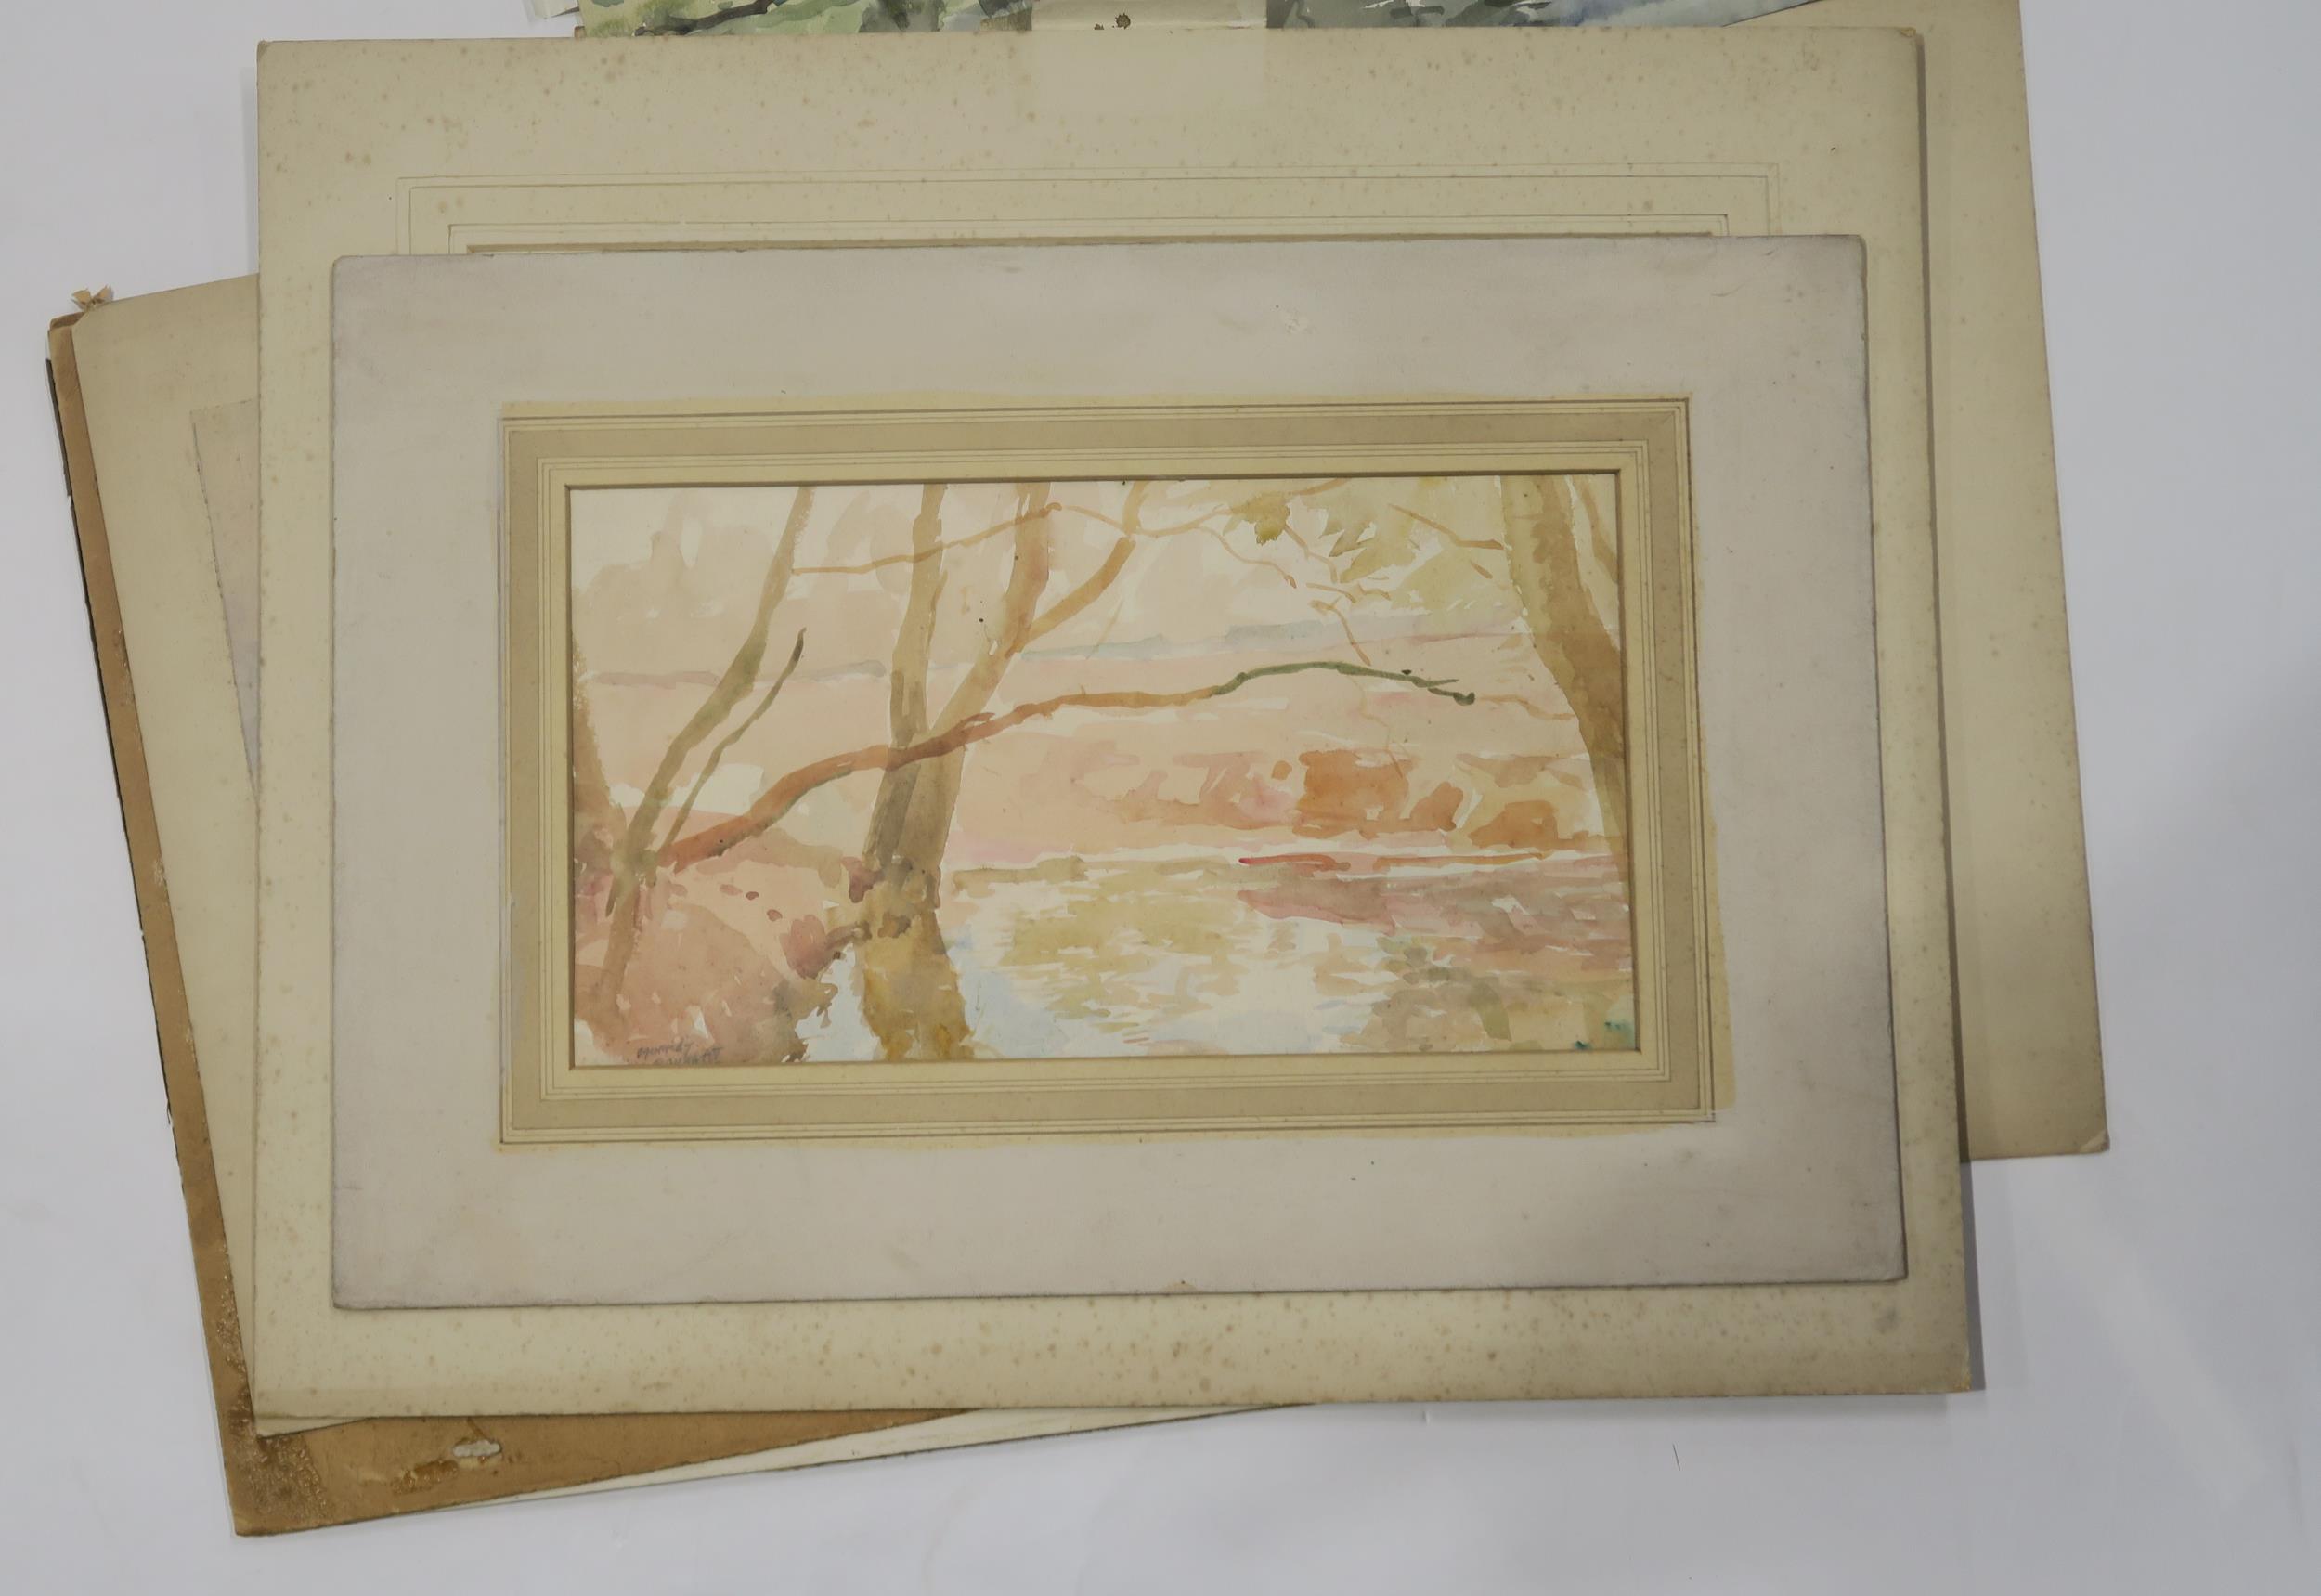 MURRAY MCNEEL CAIRD URQUHART (SCOTTISH 1880-1972) A COLLECTION OF 12 WATERCOLOURS ON PAPER, - Image 6 of 6